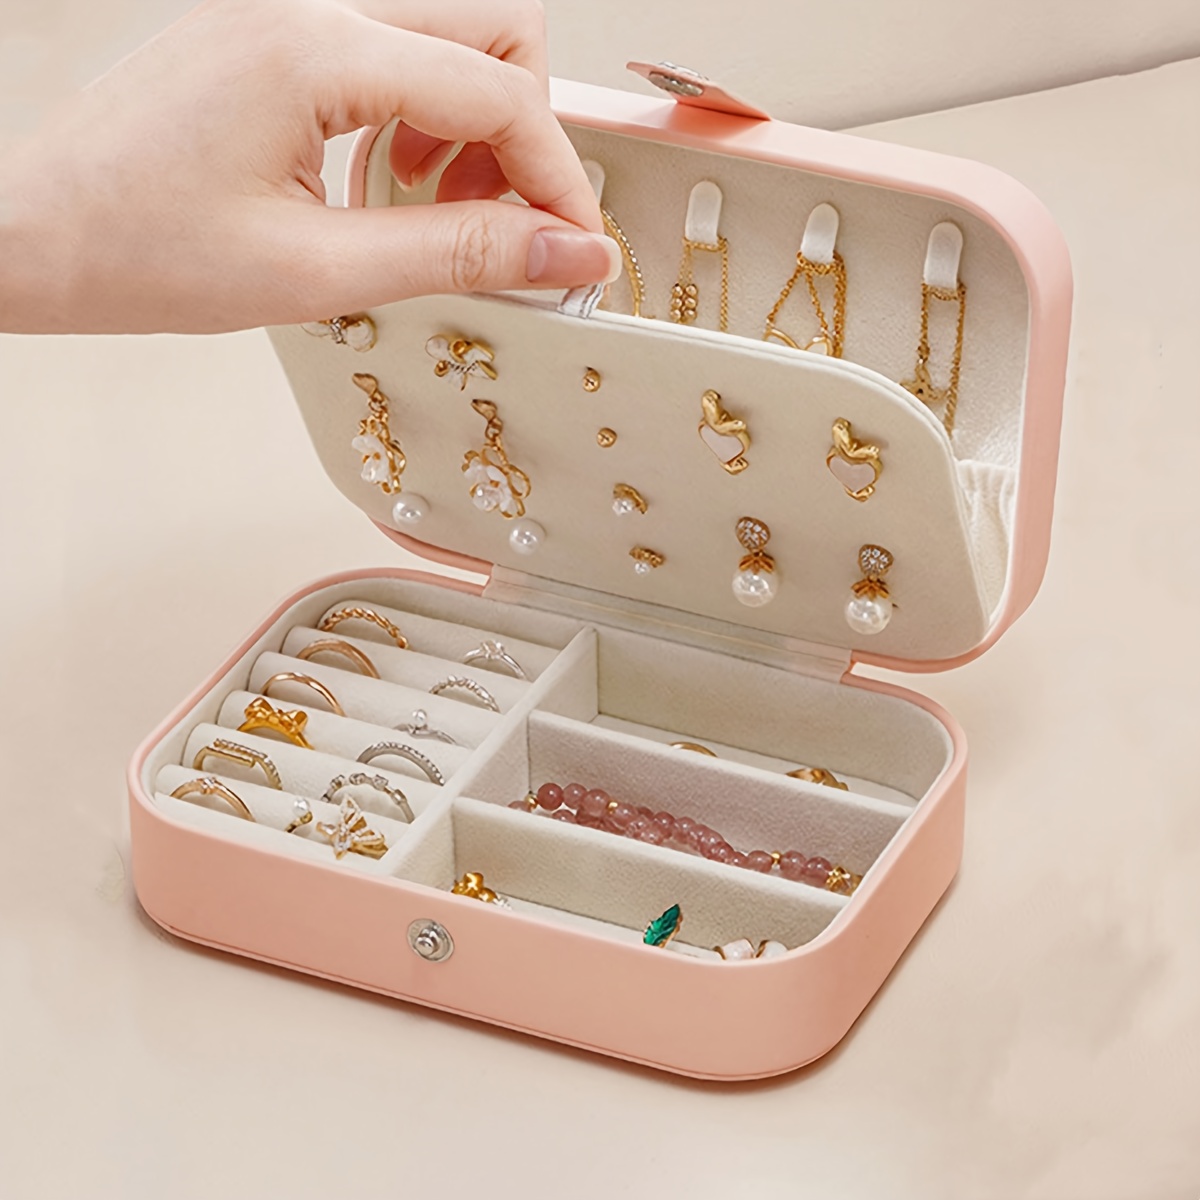 

1pc Portable Jewelry Organizer Box For Travel, Contemporary Style Plastic Mini Storage Case For Rings, Earrings, Bracelets, Lipstick With Removable Dividers